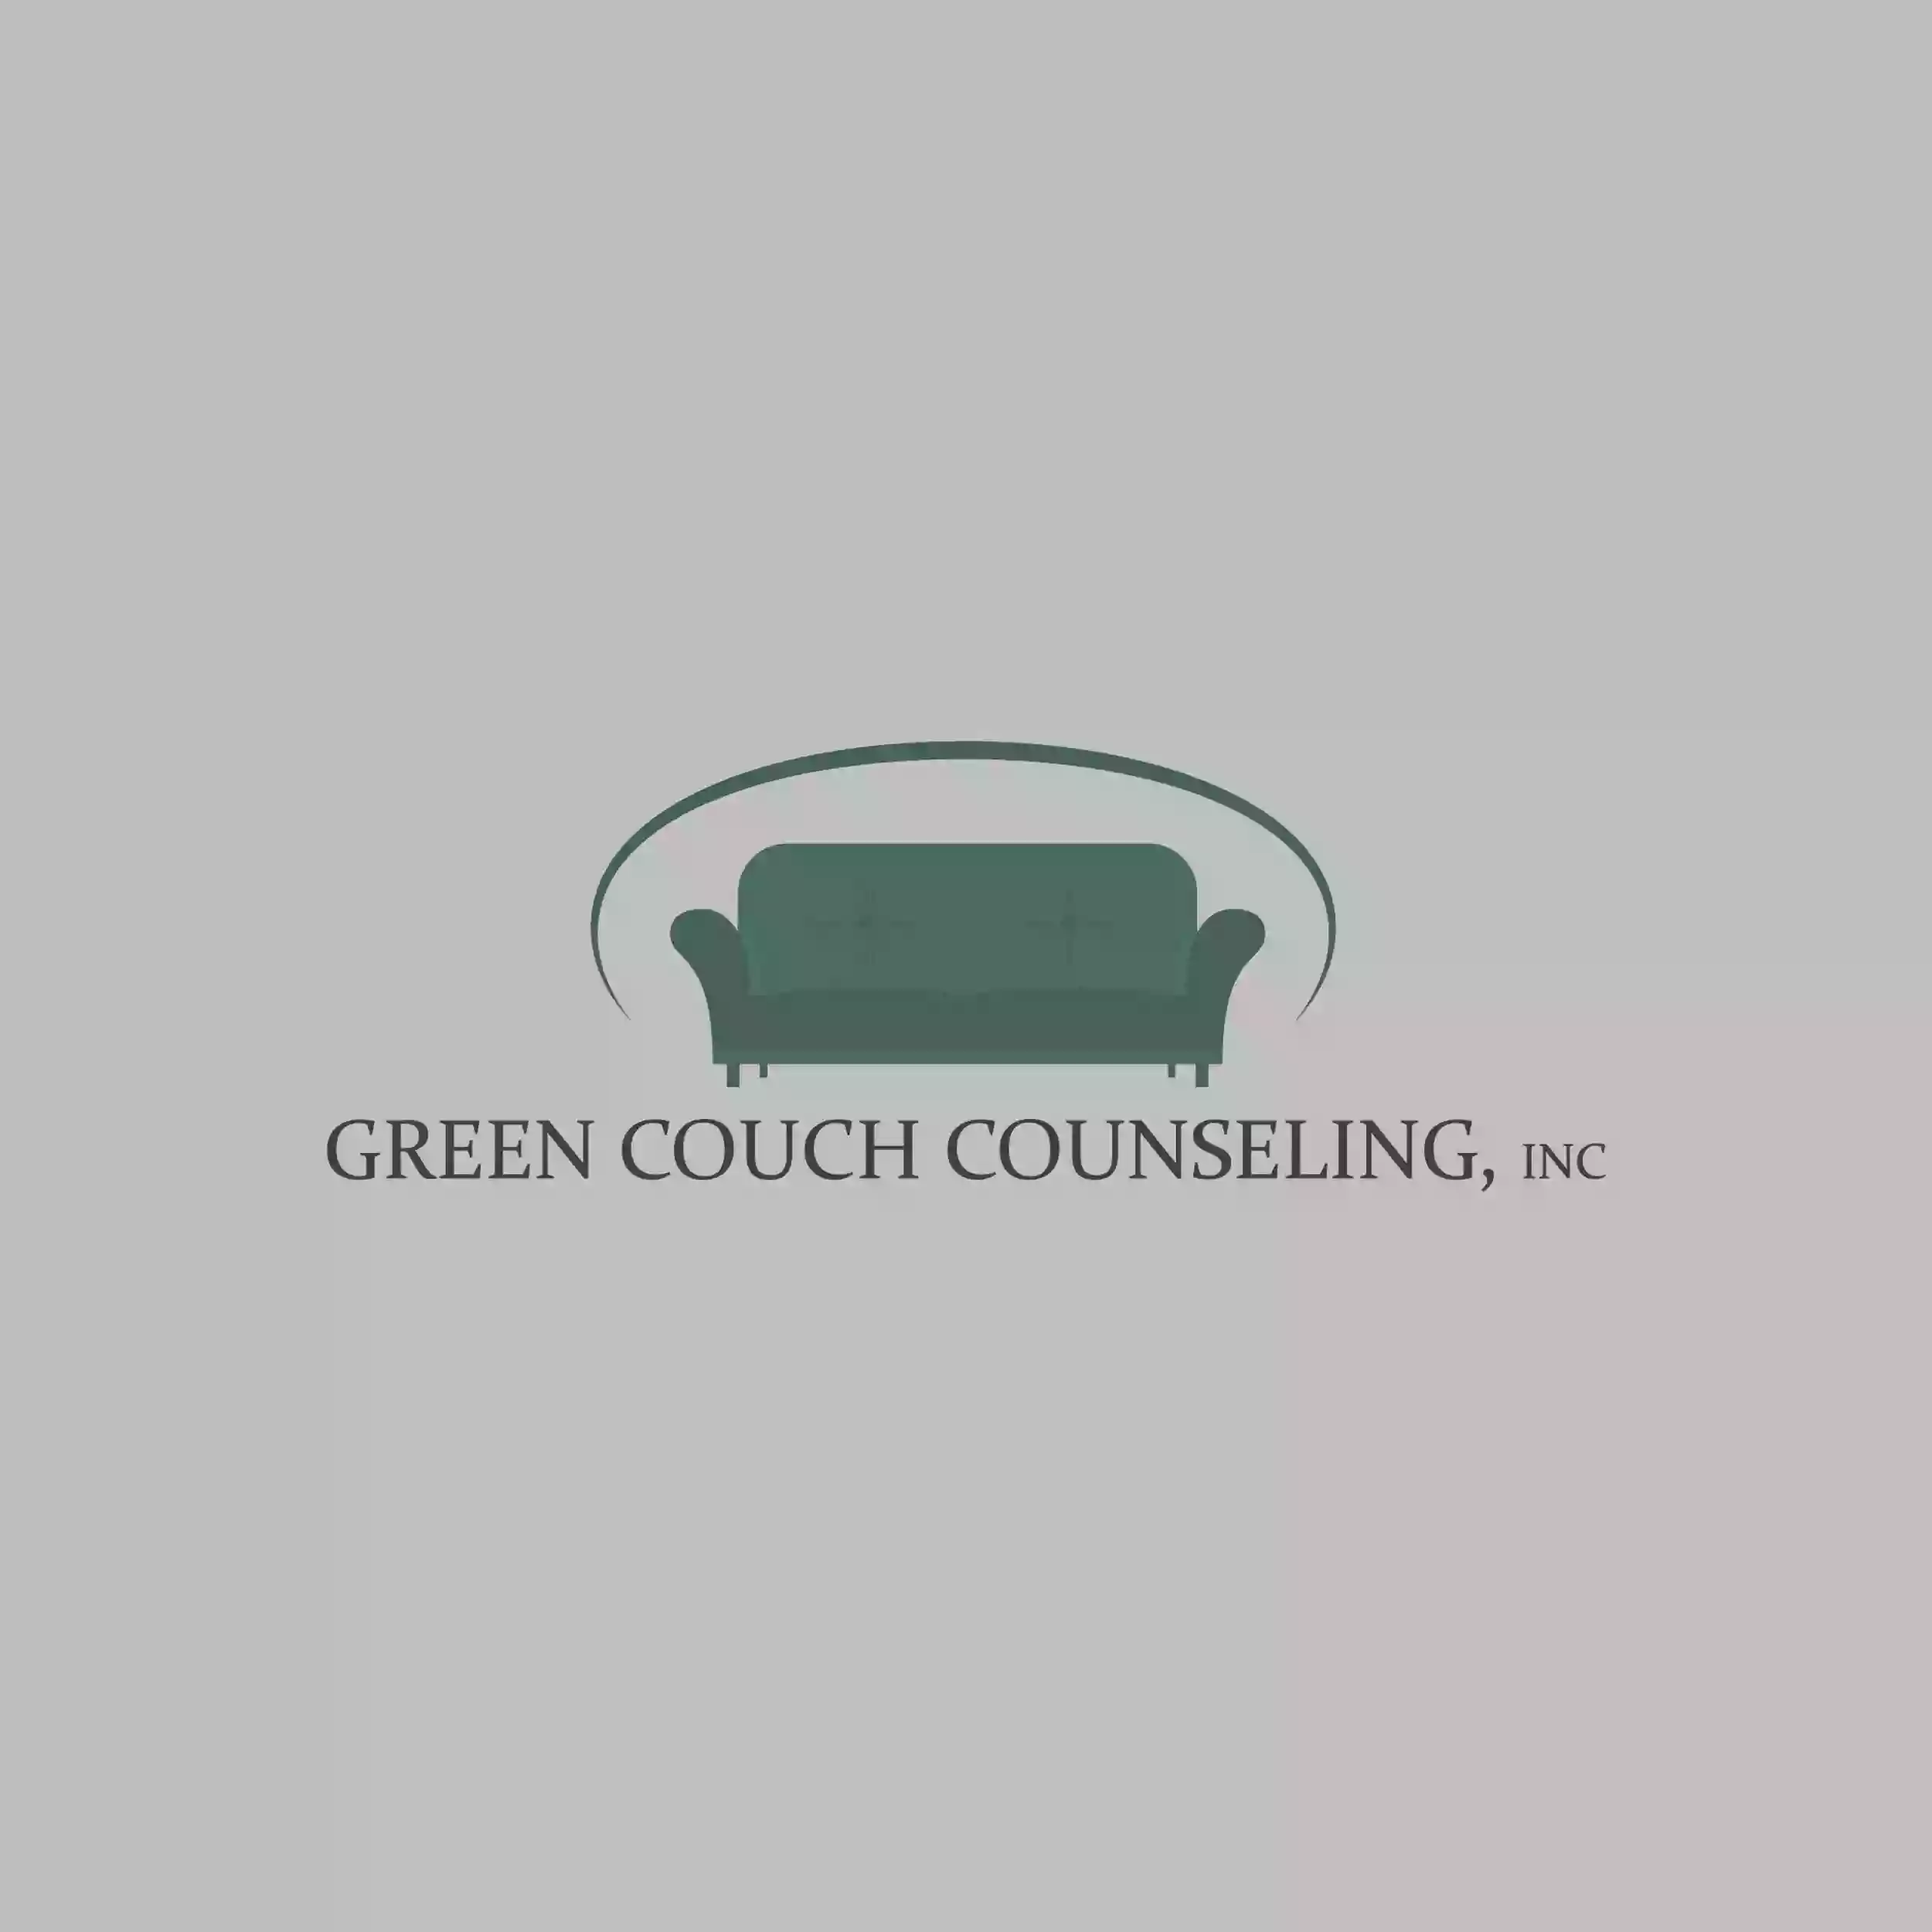 Green Couch Counseling